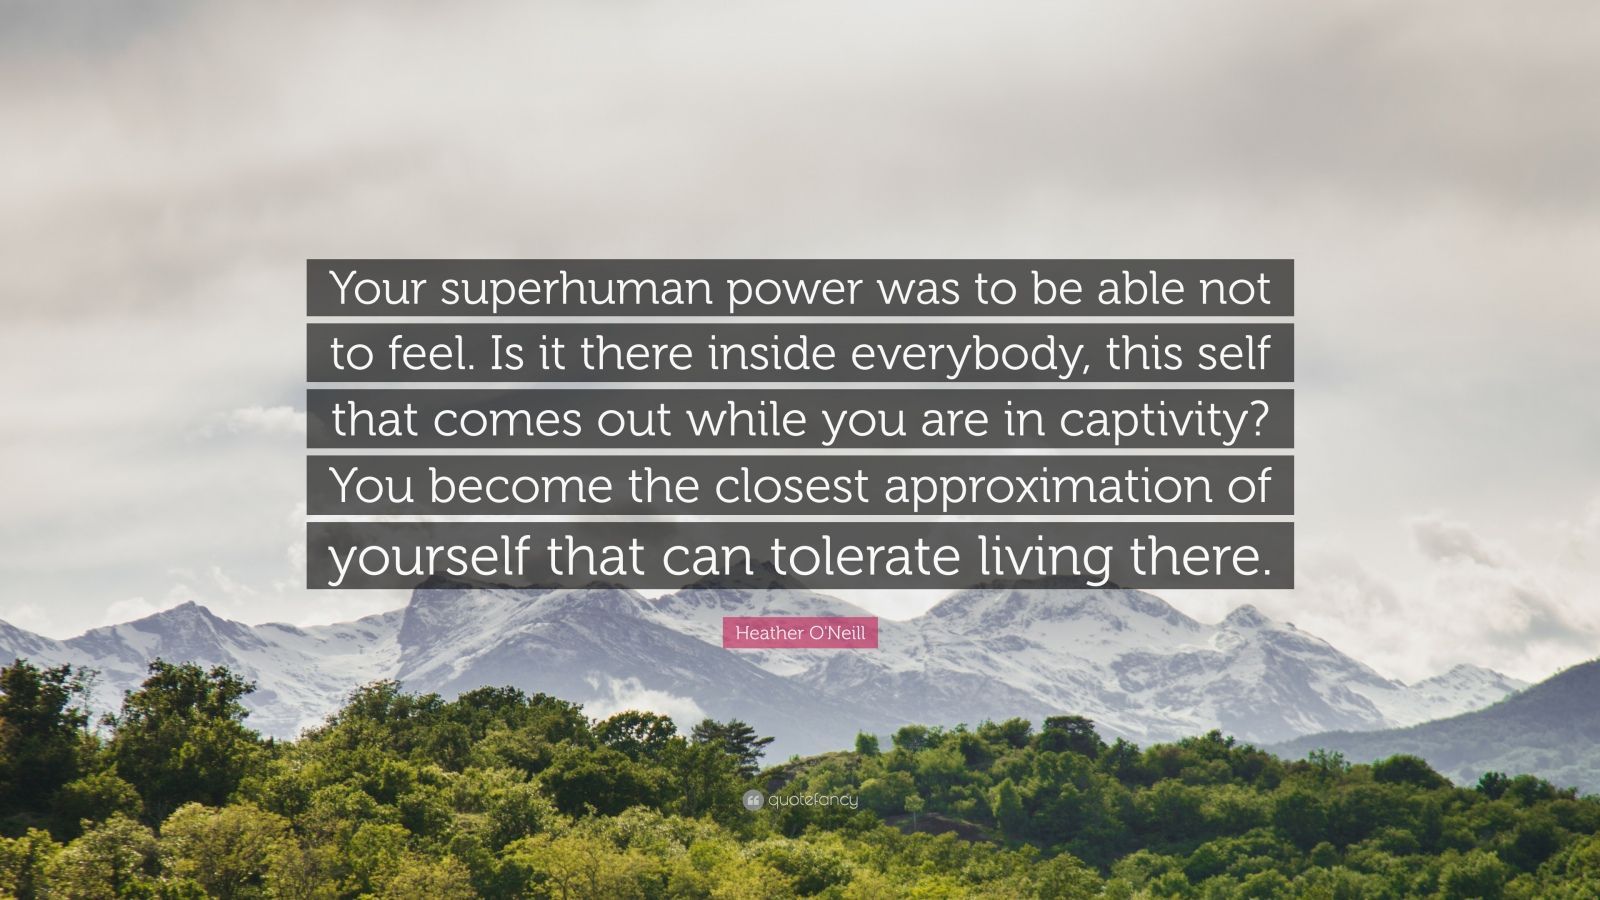 Heather O'Neill Quote: “Your superhuman power was to be able not to feel. Is it there inside everybody, this self that comes out while you are i.” (7 wallpaper)